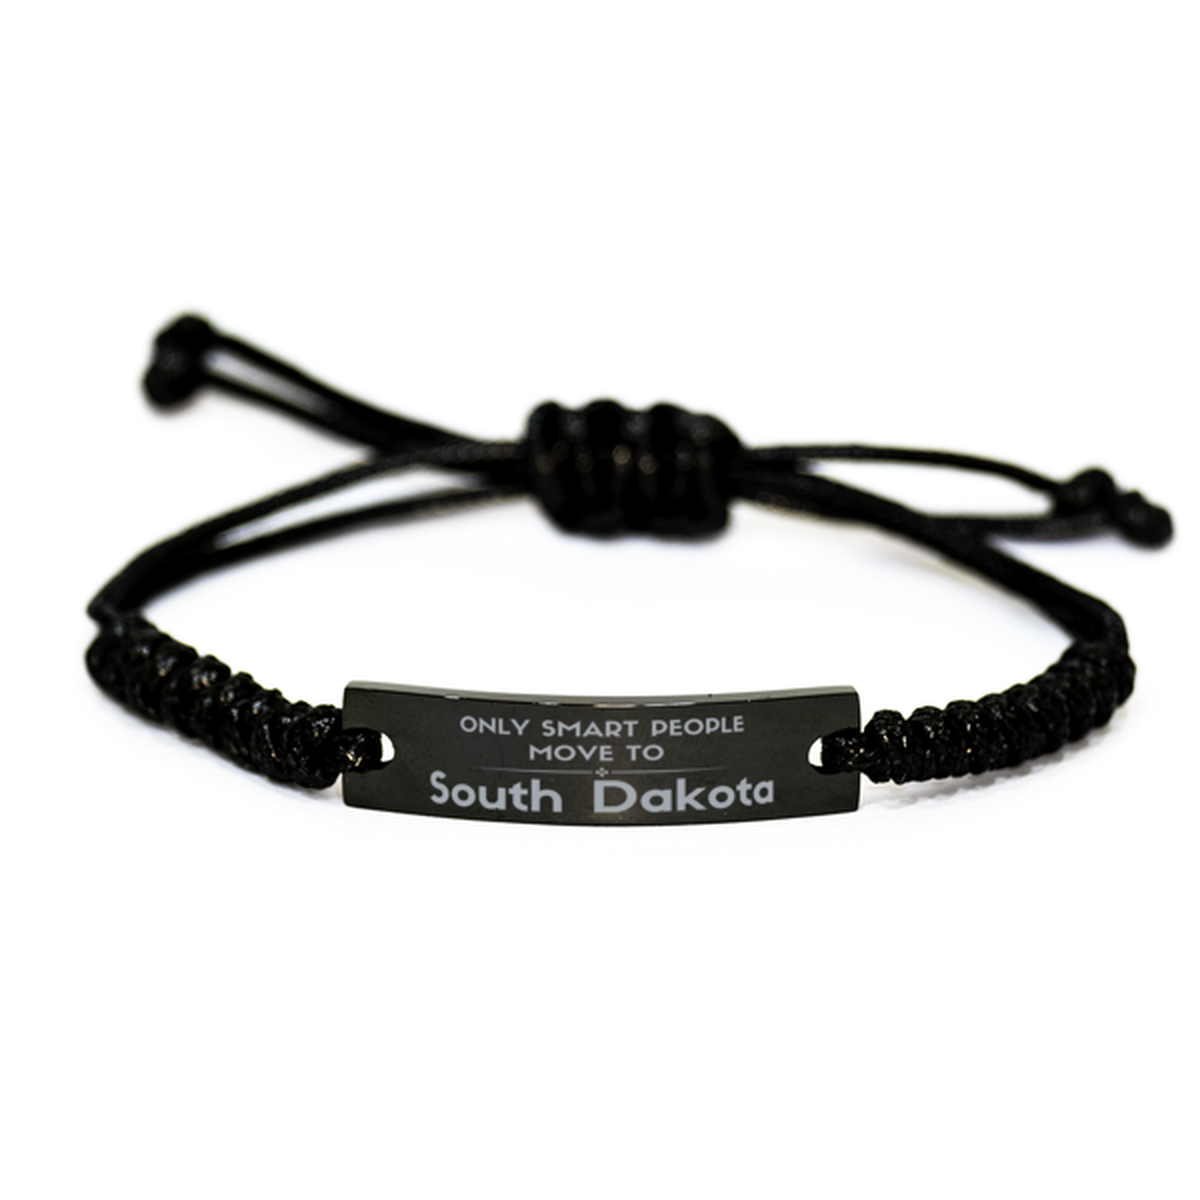 Only smart people move to South Dakota Black Rope Bracelet, Gag Gifts For South Dakota, Move to South Dakota Gifts for Friends Coworker Funny Saying Quote